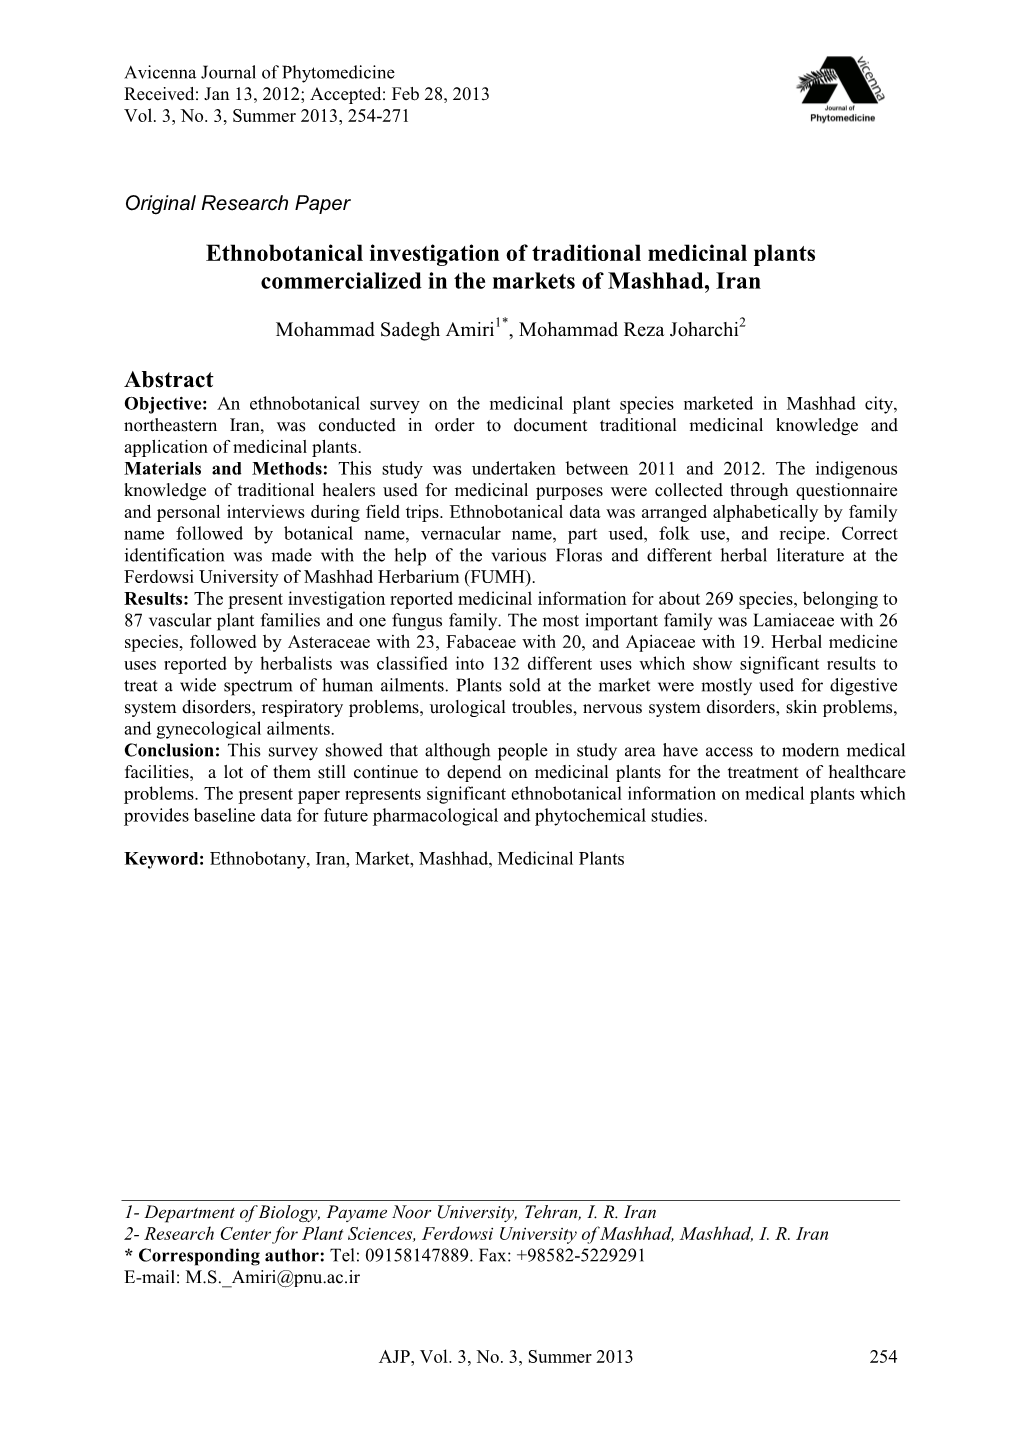 Ethnobotanical Investigation of Traditional Medicinal Plants Commercialized in the Markets of Mashhad, Iran